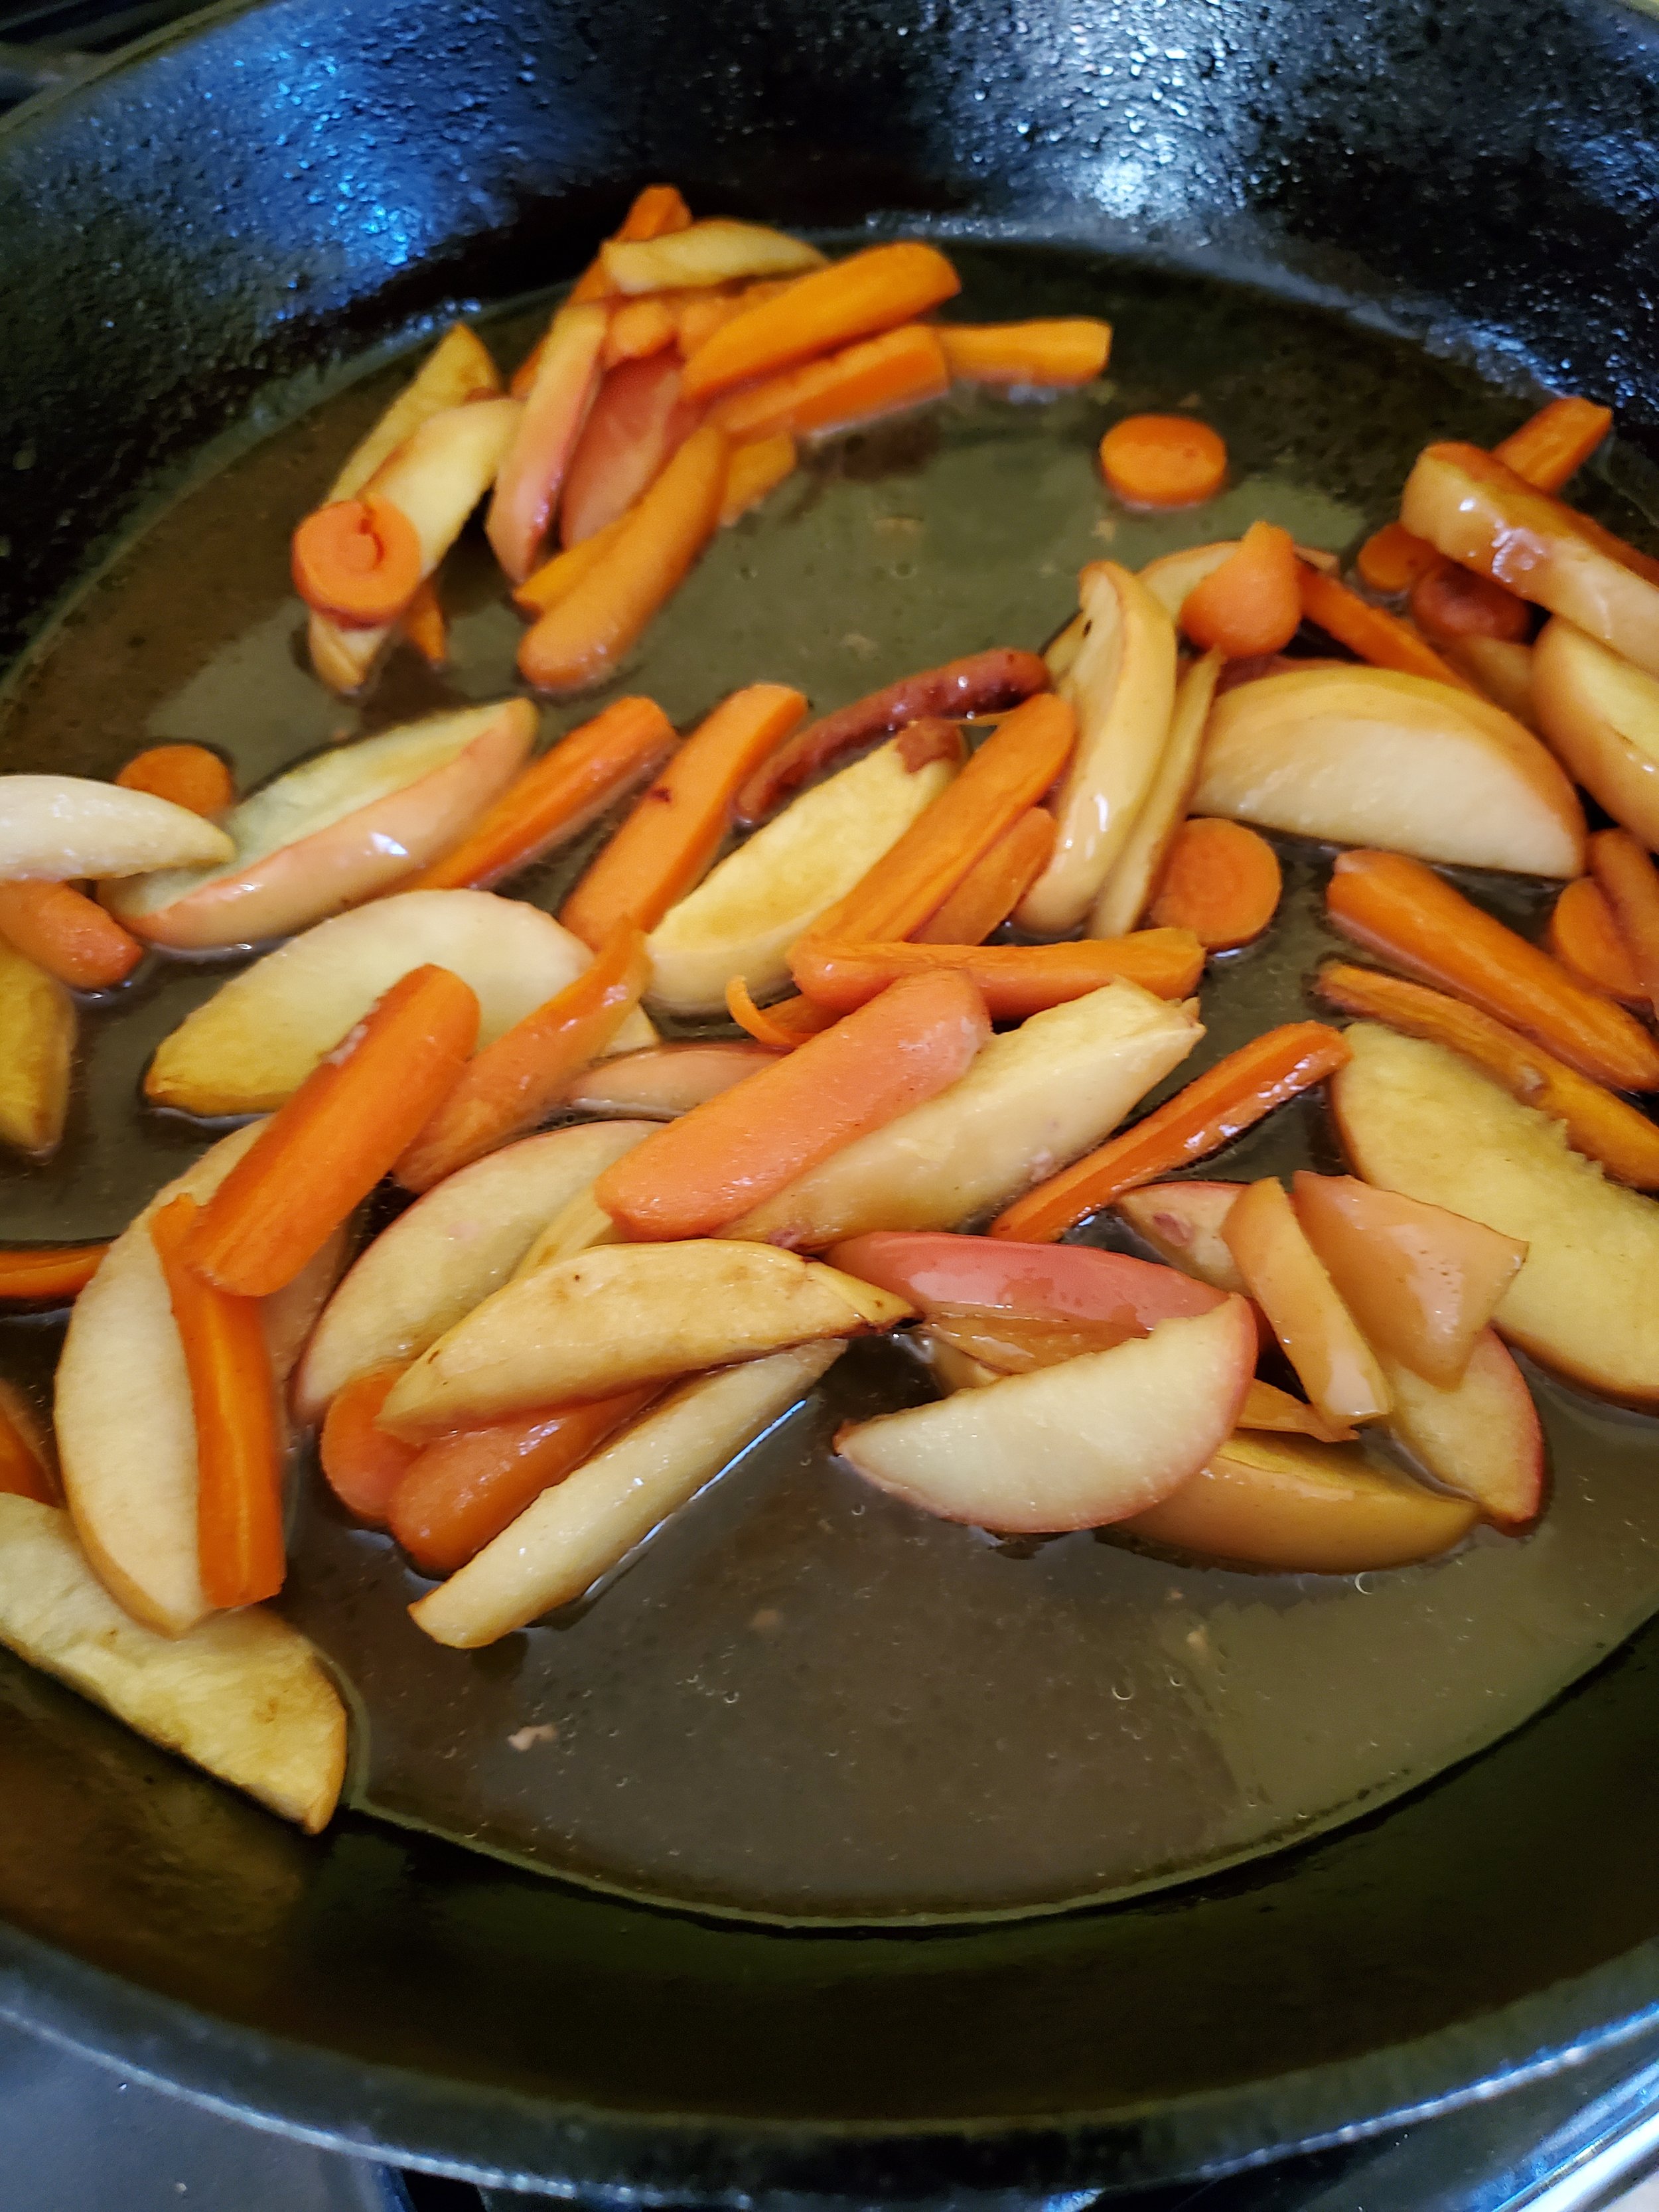 Time to saute the apples and carrots